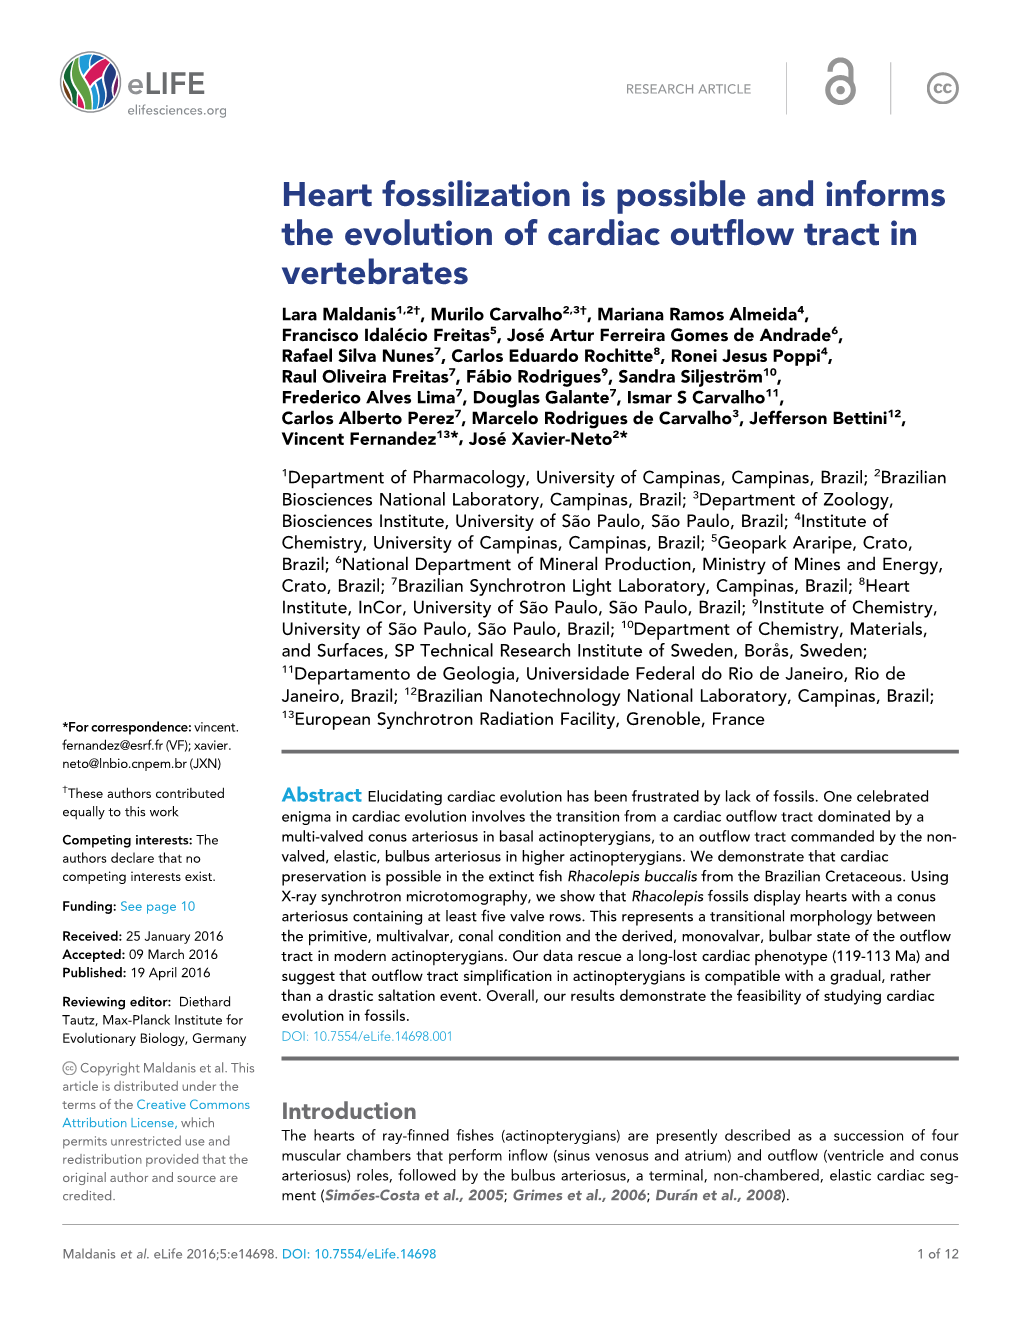 Heart Fossilization Is Possible and Informs the Evolution of Cardiac